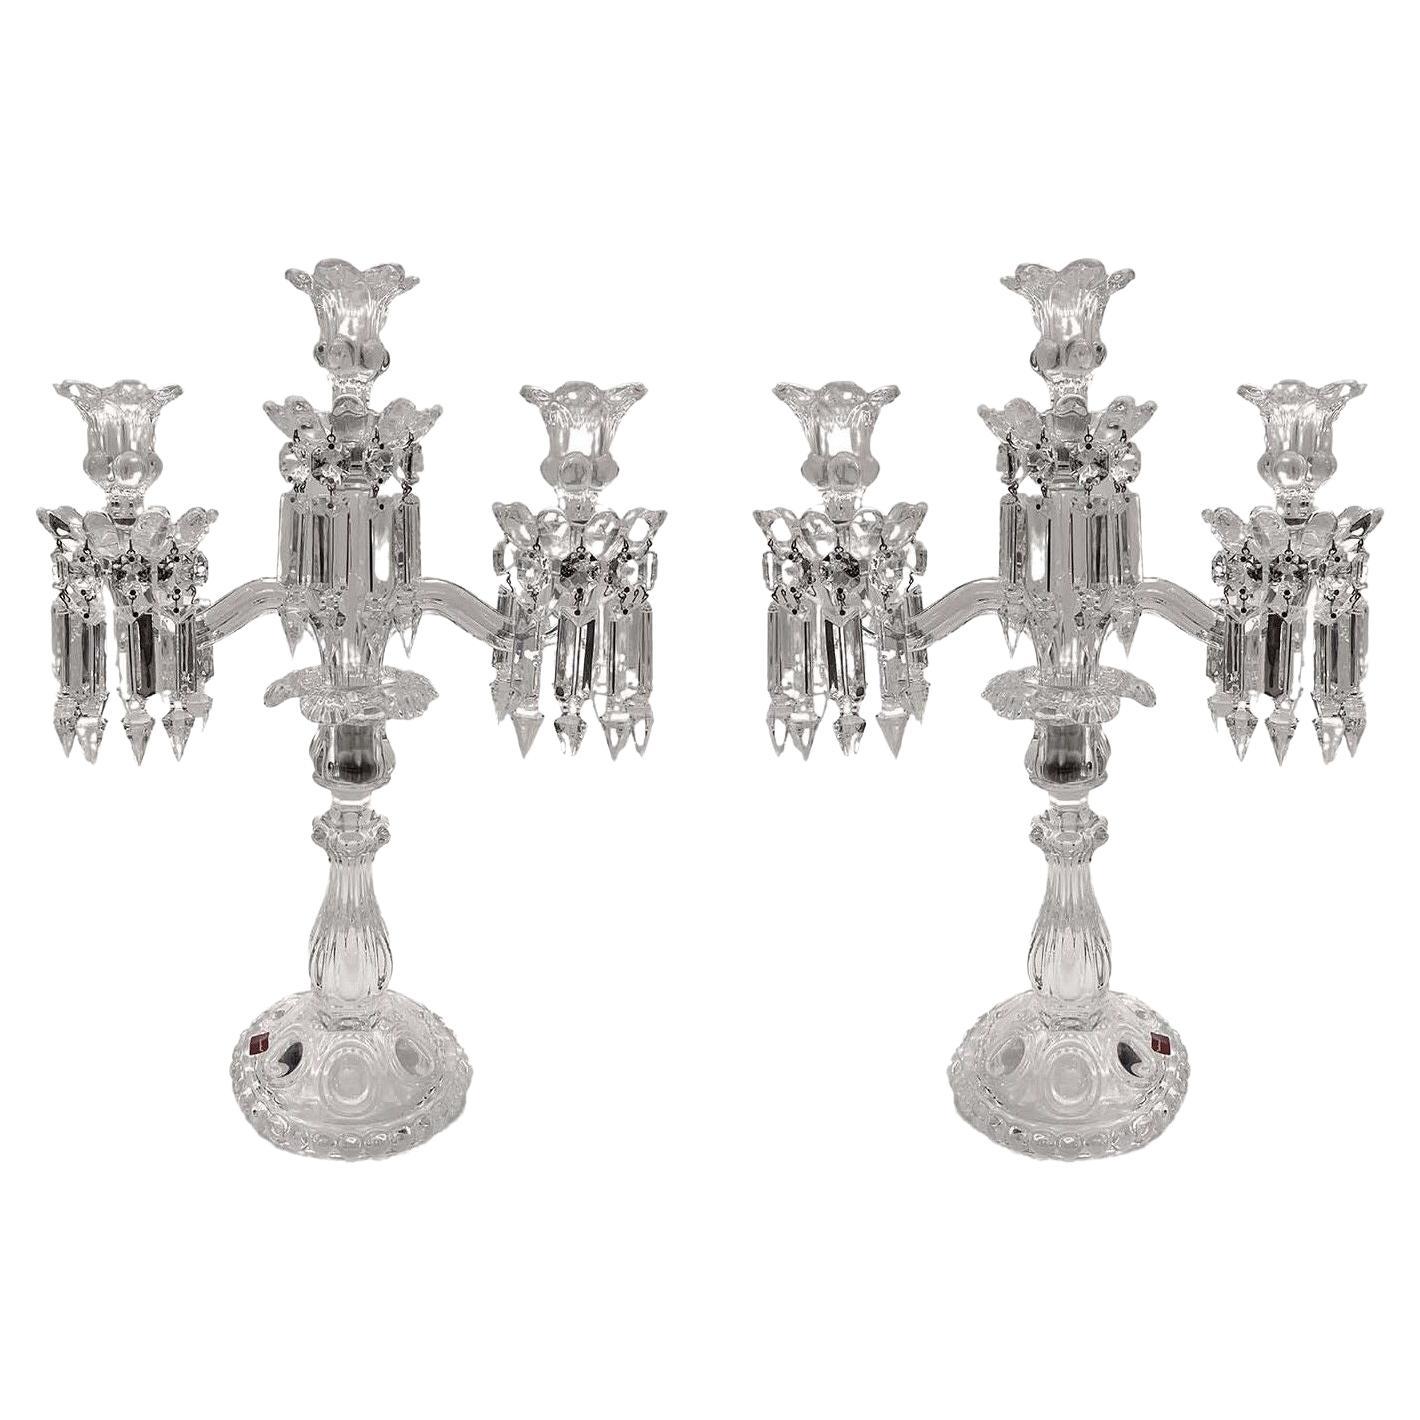 Pair of Mid-Century Modern Neoclassical Glass Obelisk Candelabras by Baccarat